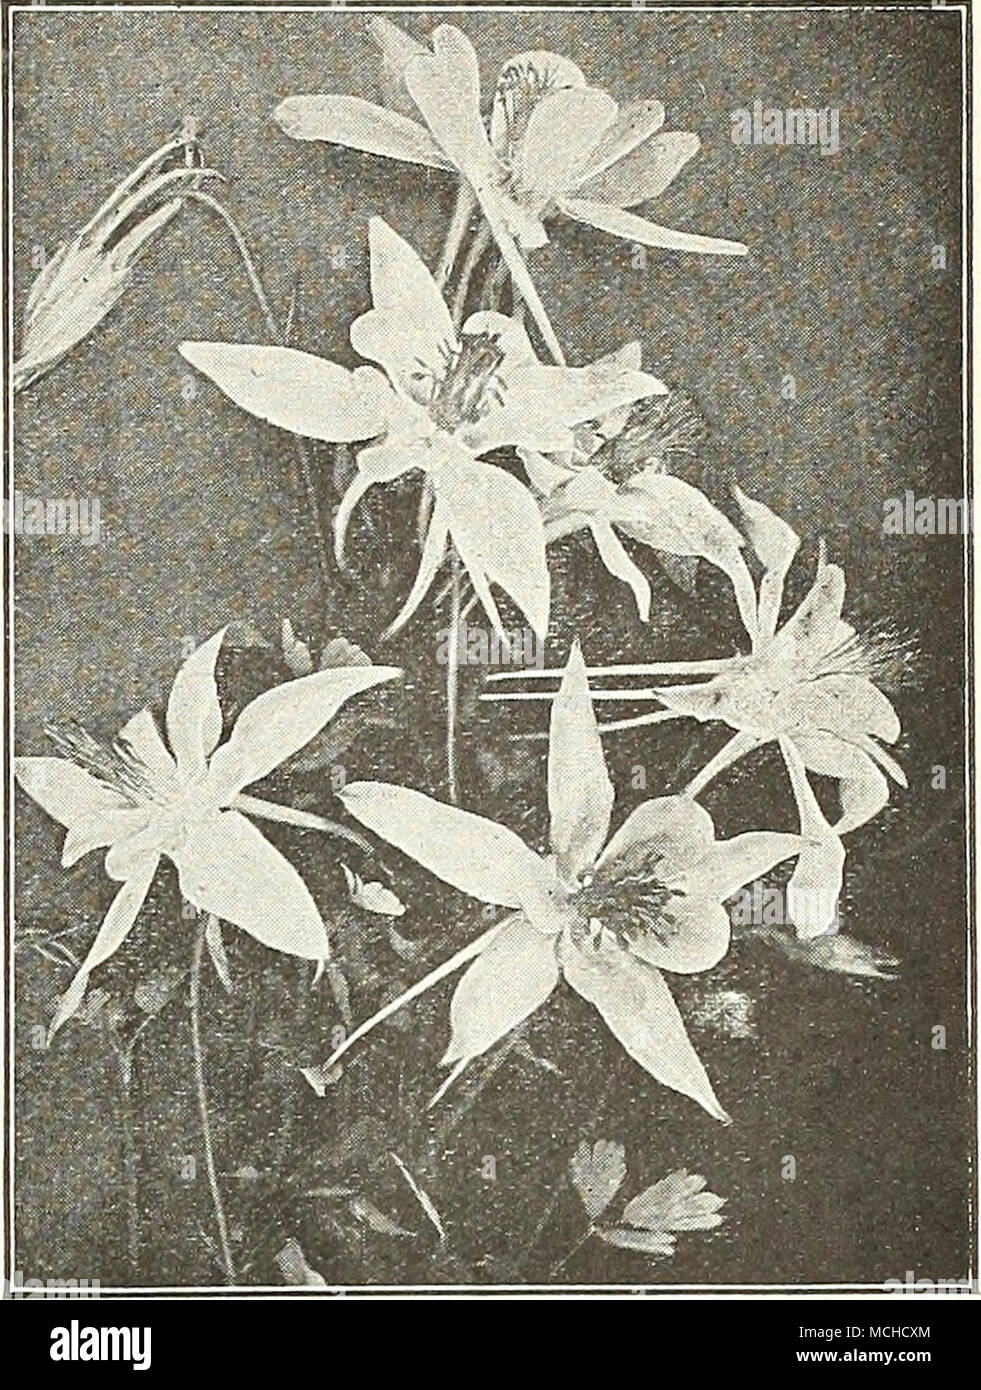 . Dreer's Long-spurred Aquilegia or Columbine Price. 30 cts. each; $2.50 per doz.; $18.00 per 100. One each of the 6 sorts for $1.25. jffe^jj r&quot;- - BJKMTiirg *.l£k 'vM 5Pa£SPi&gt; |K^(£|K!*^lC#K3fci&gt;BH HH^/AjB ' j . &quot;la .-^-j Arenaria (Sand-wort) Montana. A pretty creeping plant which during June is covered with attractive white flowers. A good edging plant and invaluable for the rock garden. 25 cts. each; $2.50 per doz.; $18.00 per 100. Artemisia Lactiflora Armeria (Sea Pink or Thrift) Attractive dwarf plants that will succeed in any soil, forming evergreen tufts of bright green  Stock Photo